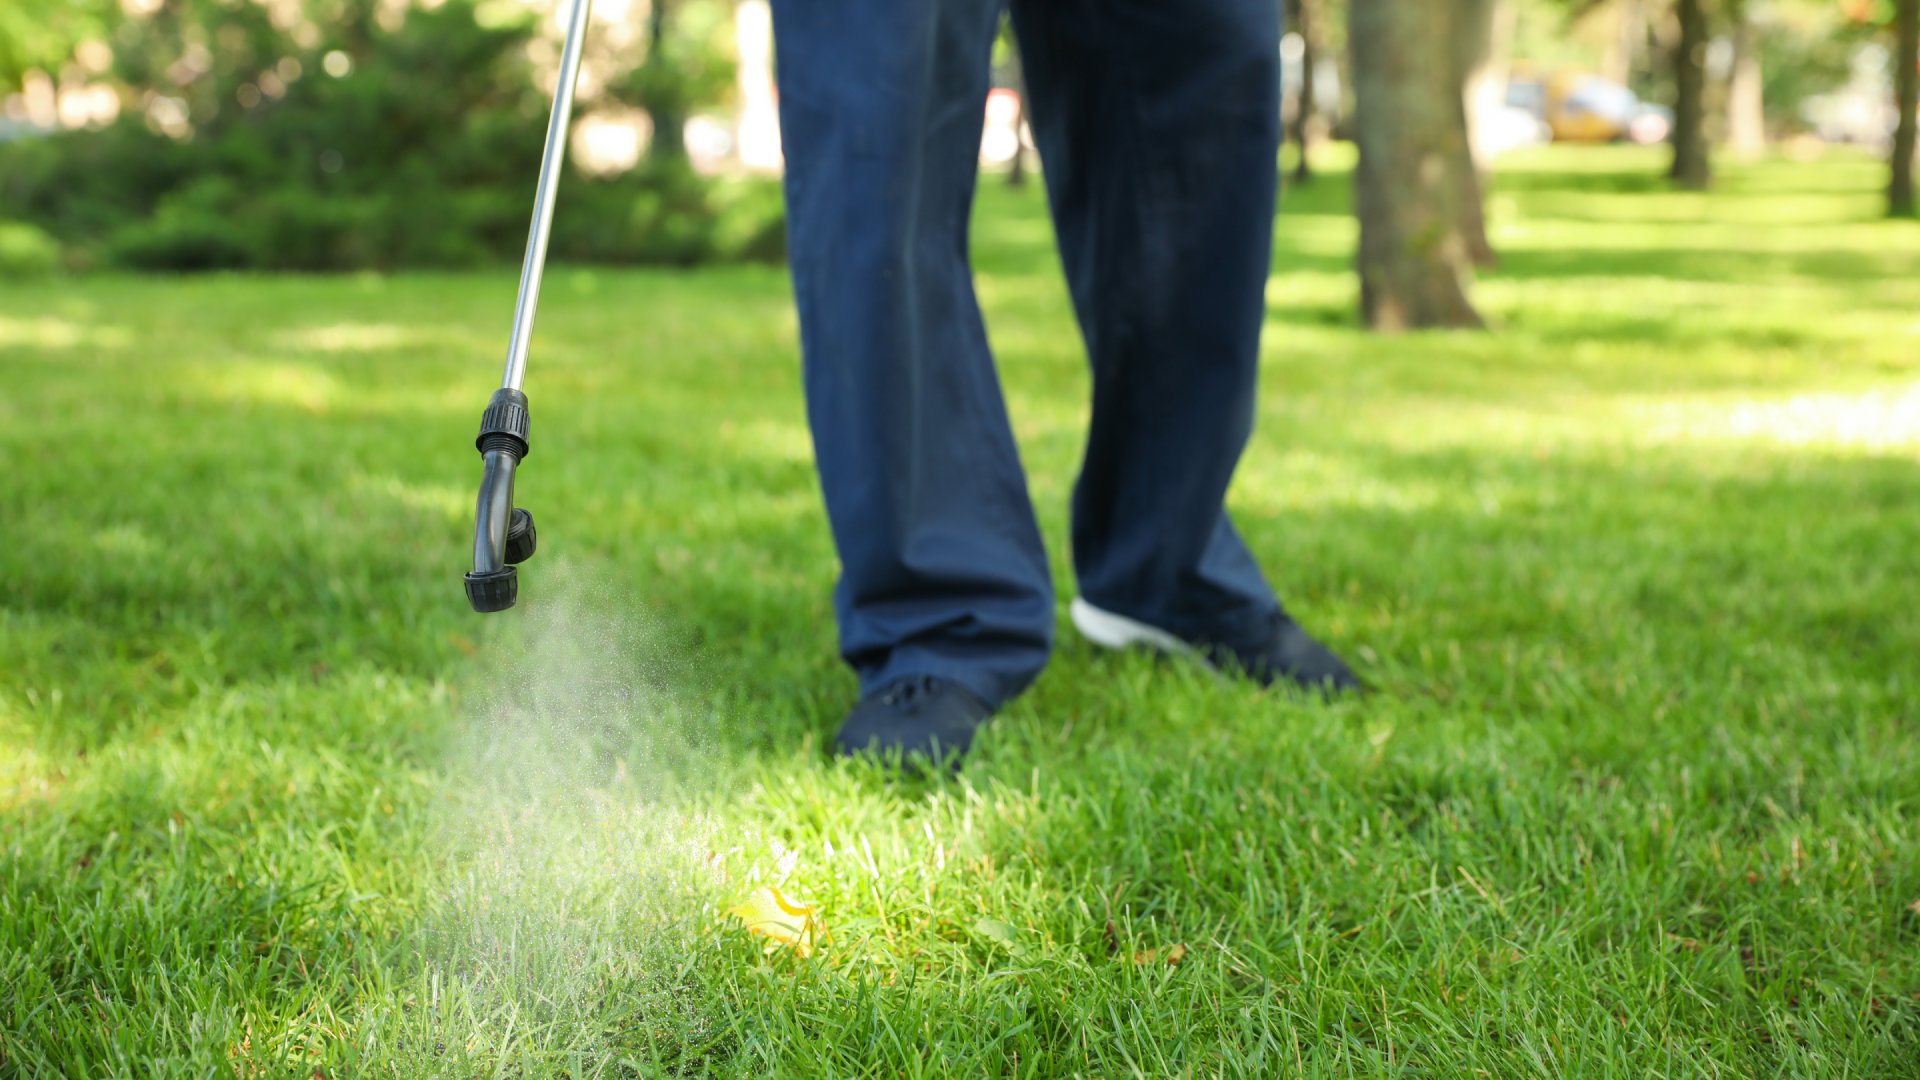 Pre-Emergent Weed Control 101 - What Is It & When Should It Be Applied?